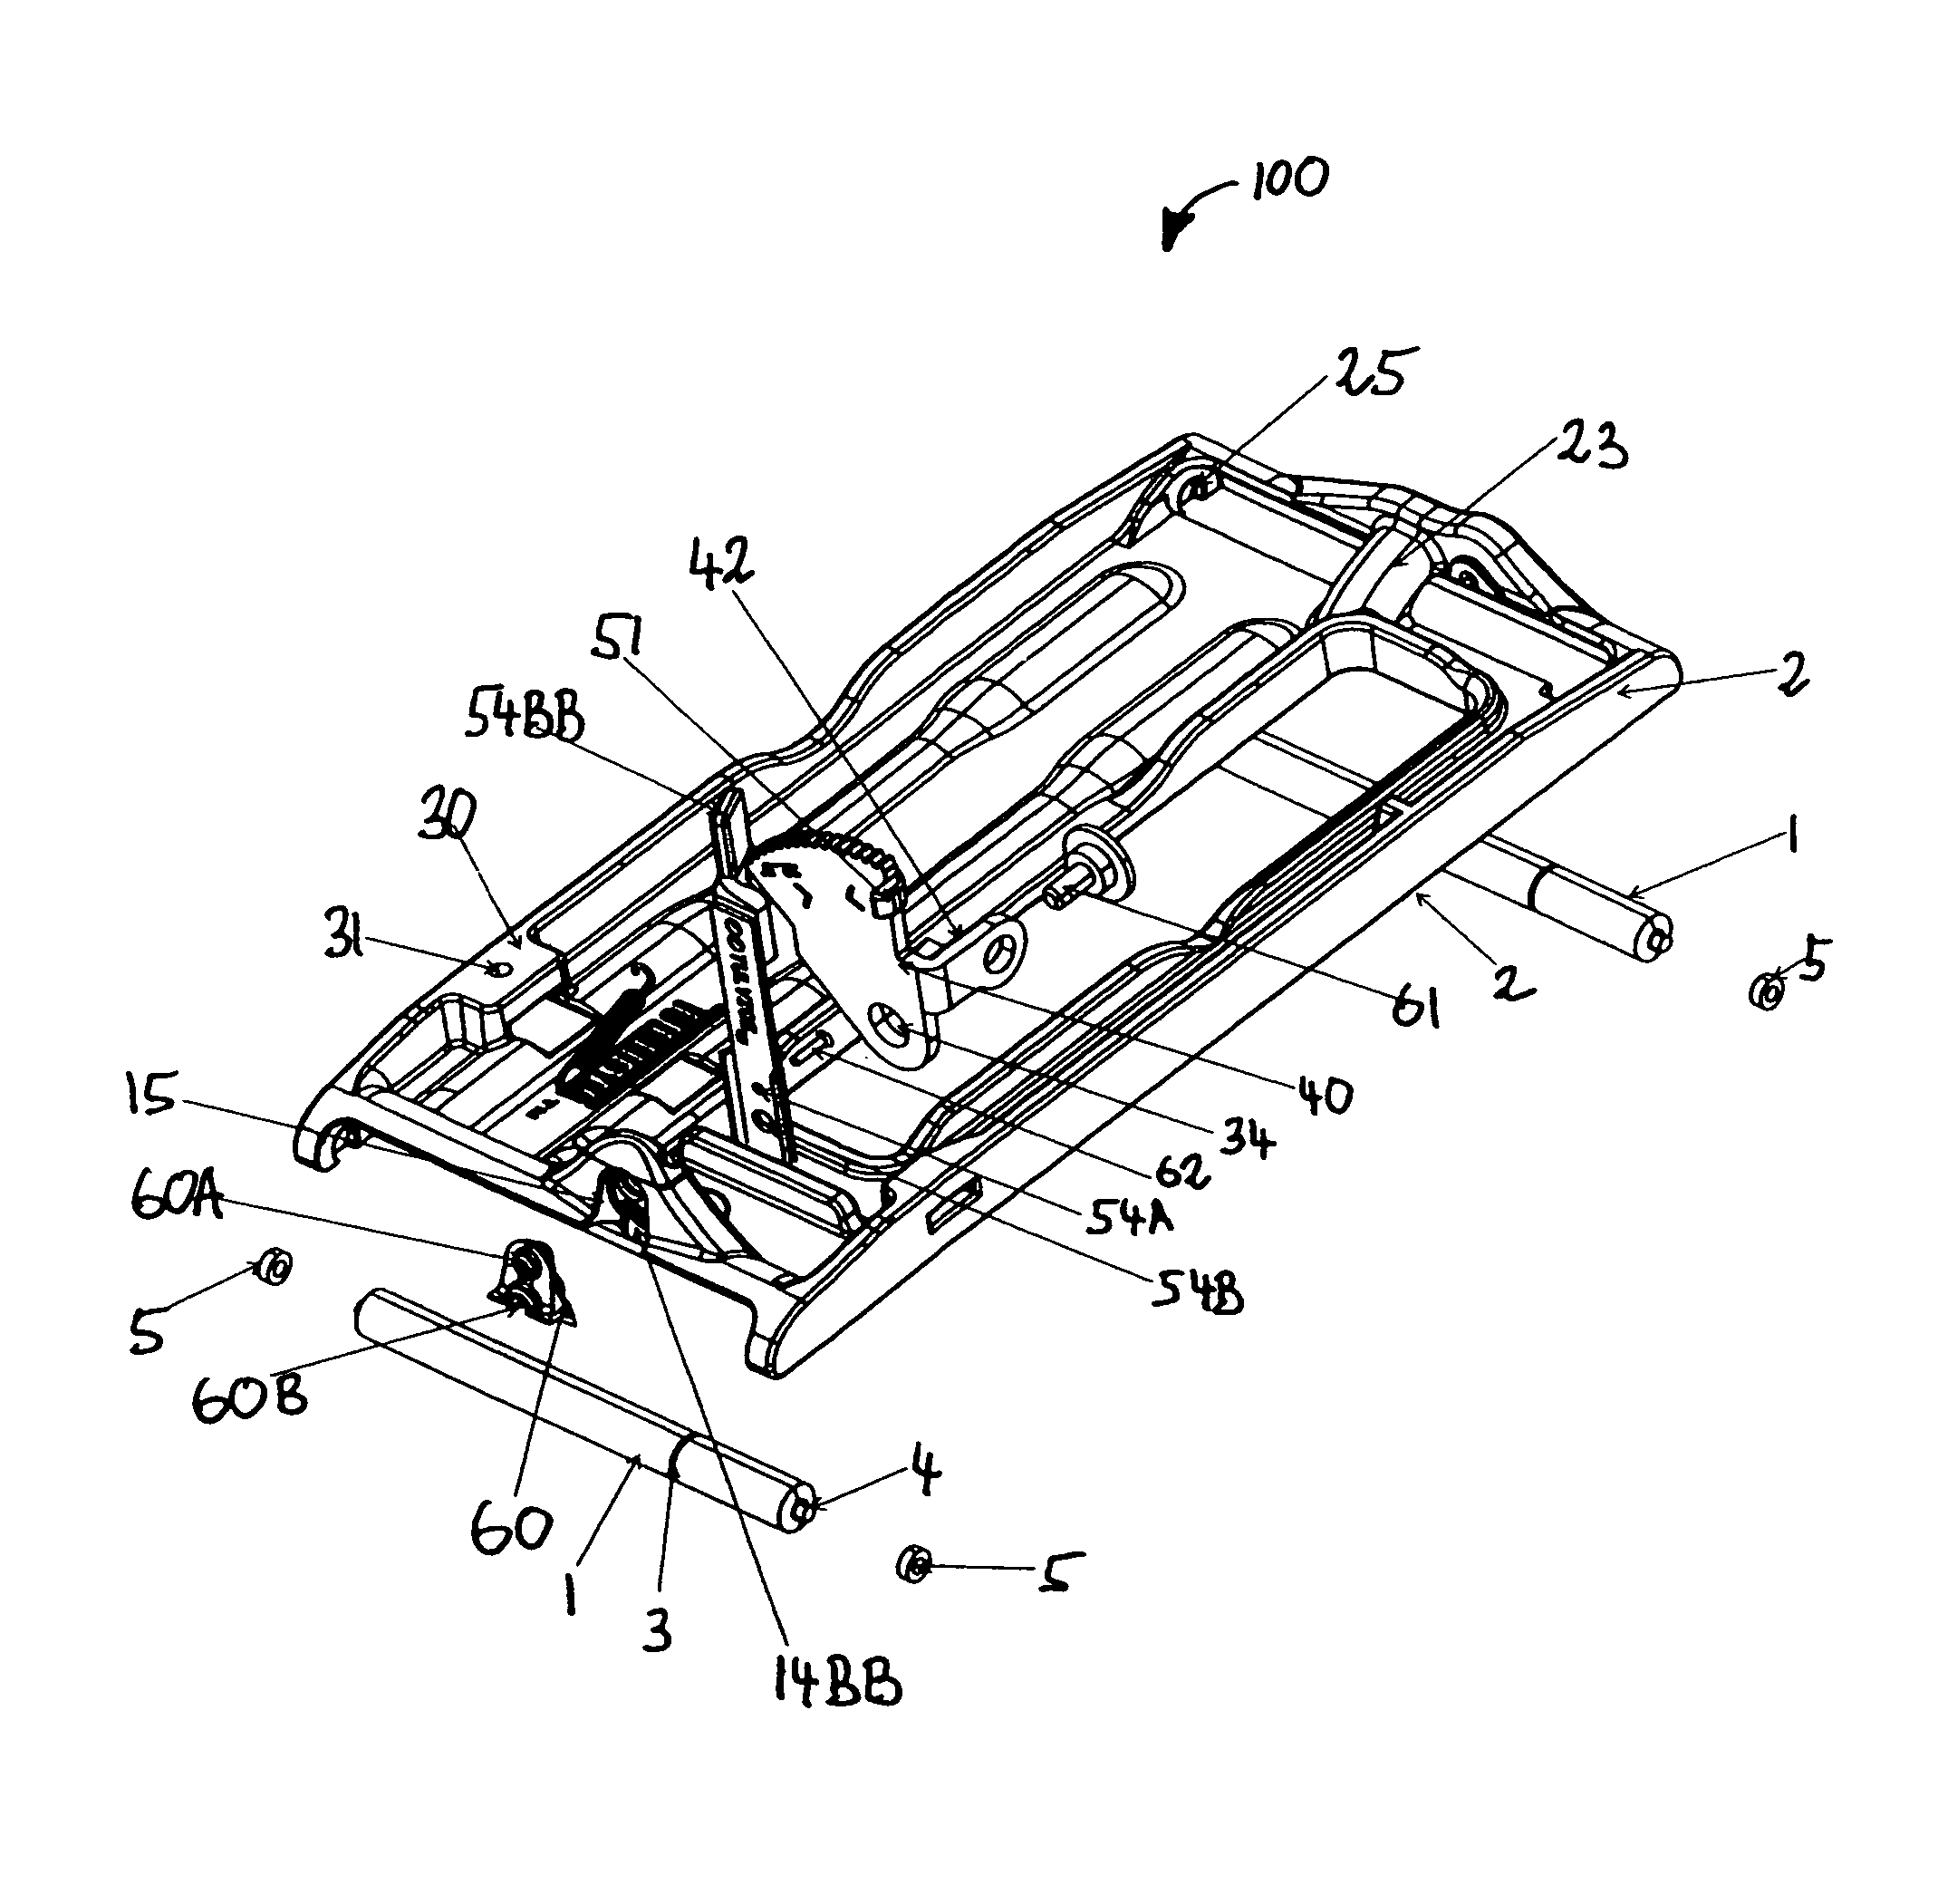 Rolling plate assembly attachment for portable power cutting tools including an improved structural design and manufactured out of improved materials, an improved wheel configuration, and an adjustable bevel gear and a cutting guide